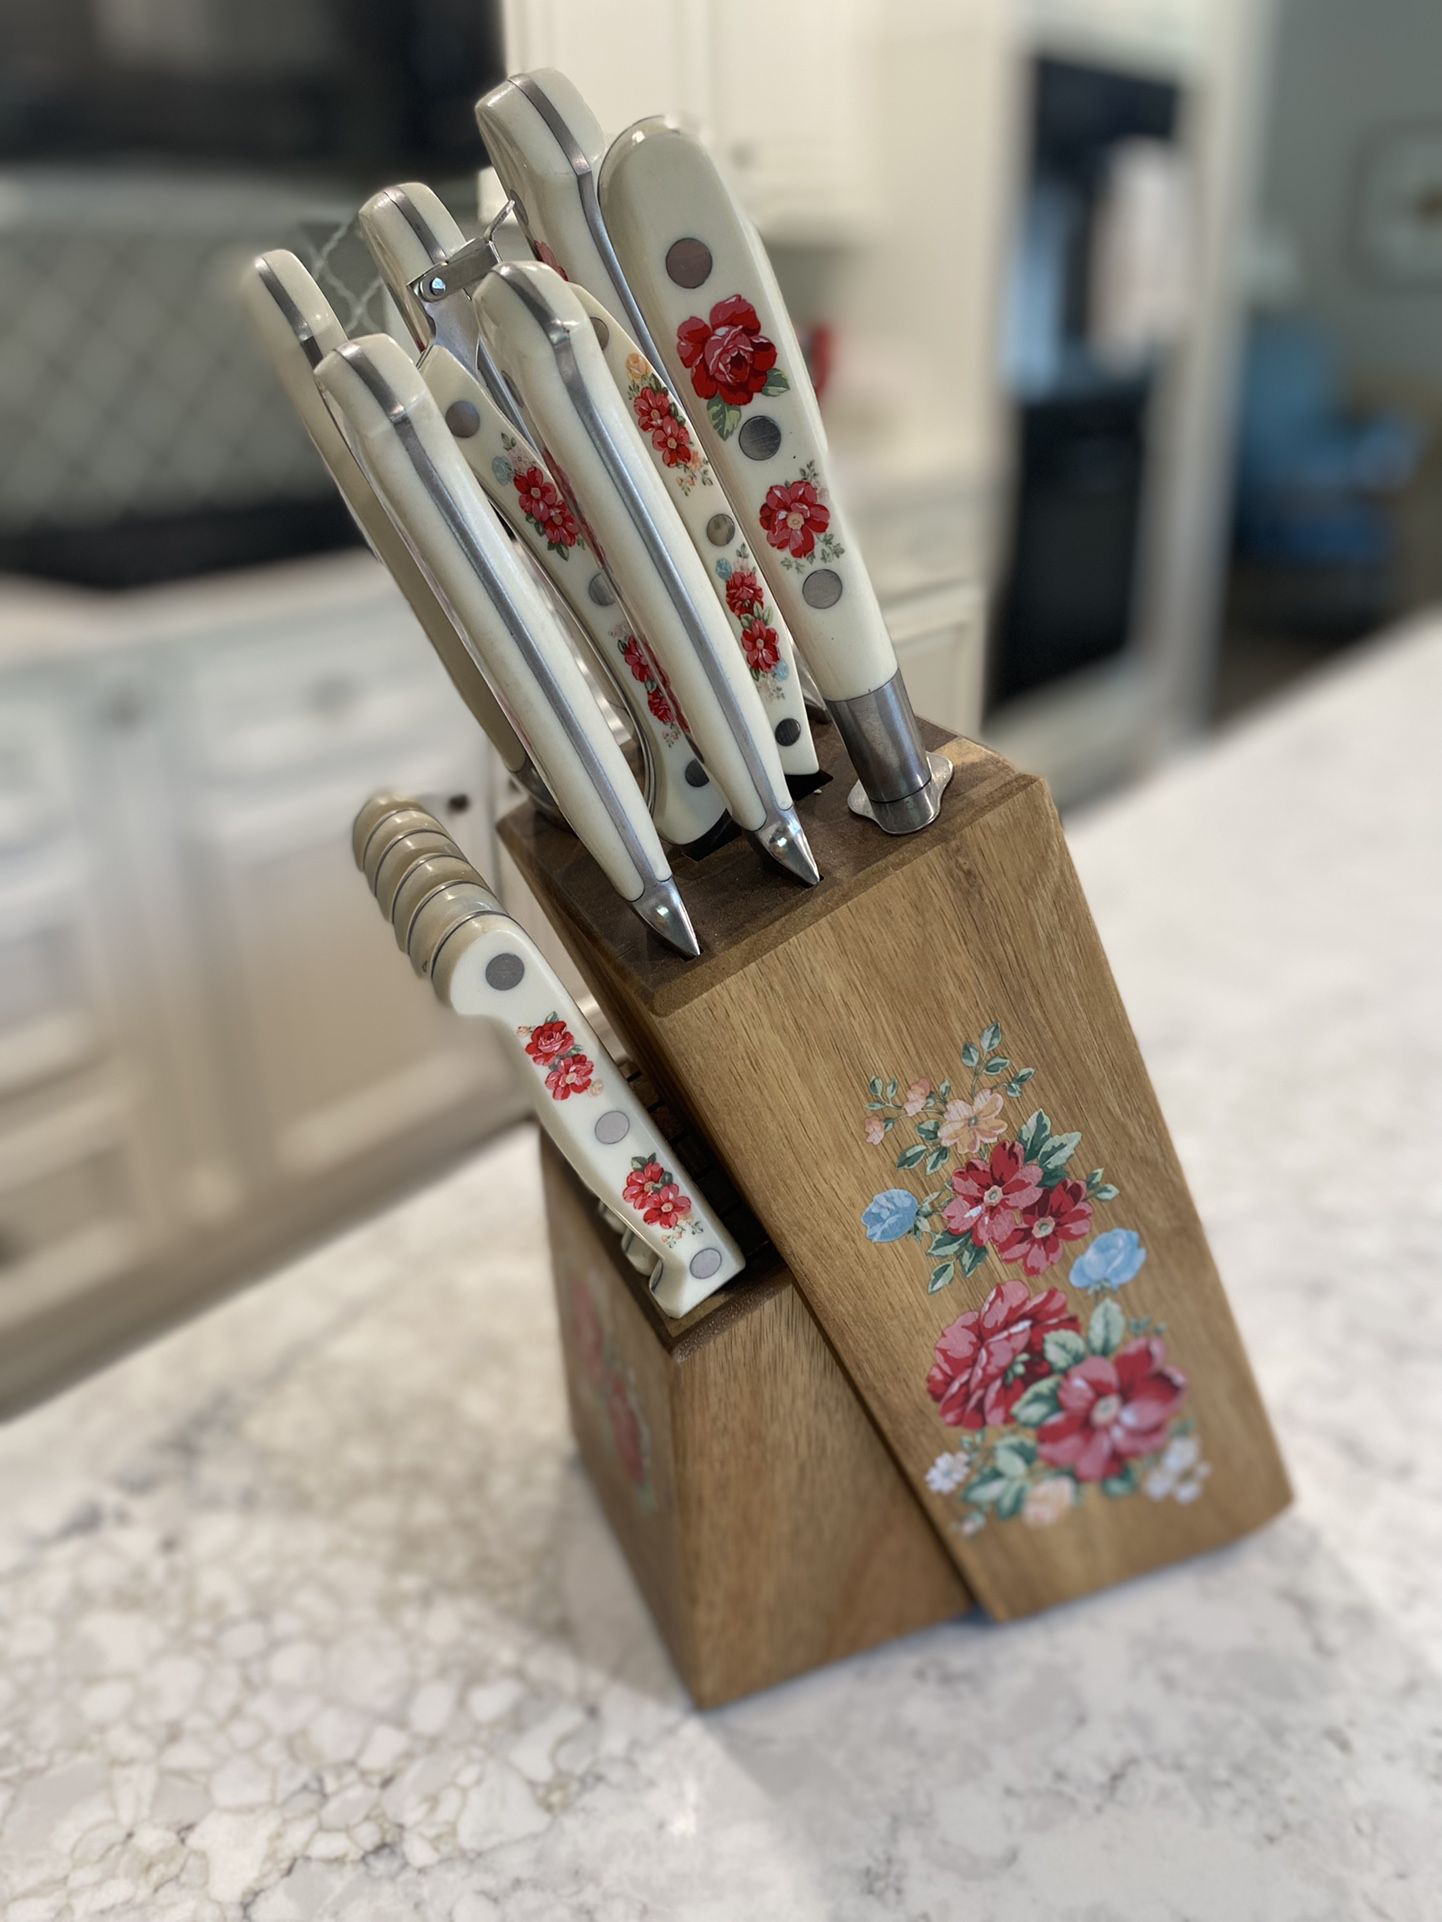 Wolfgang Puck Knife Set (2) for Sale in Scottsdale, AZ - OfferUp